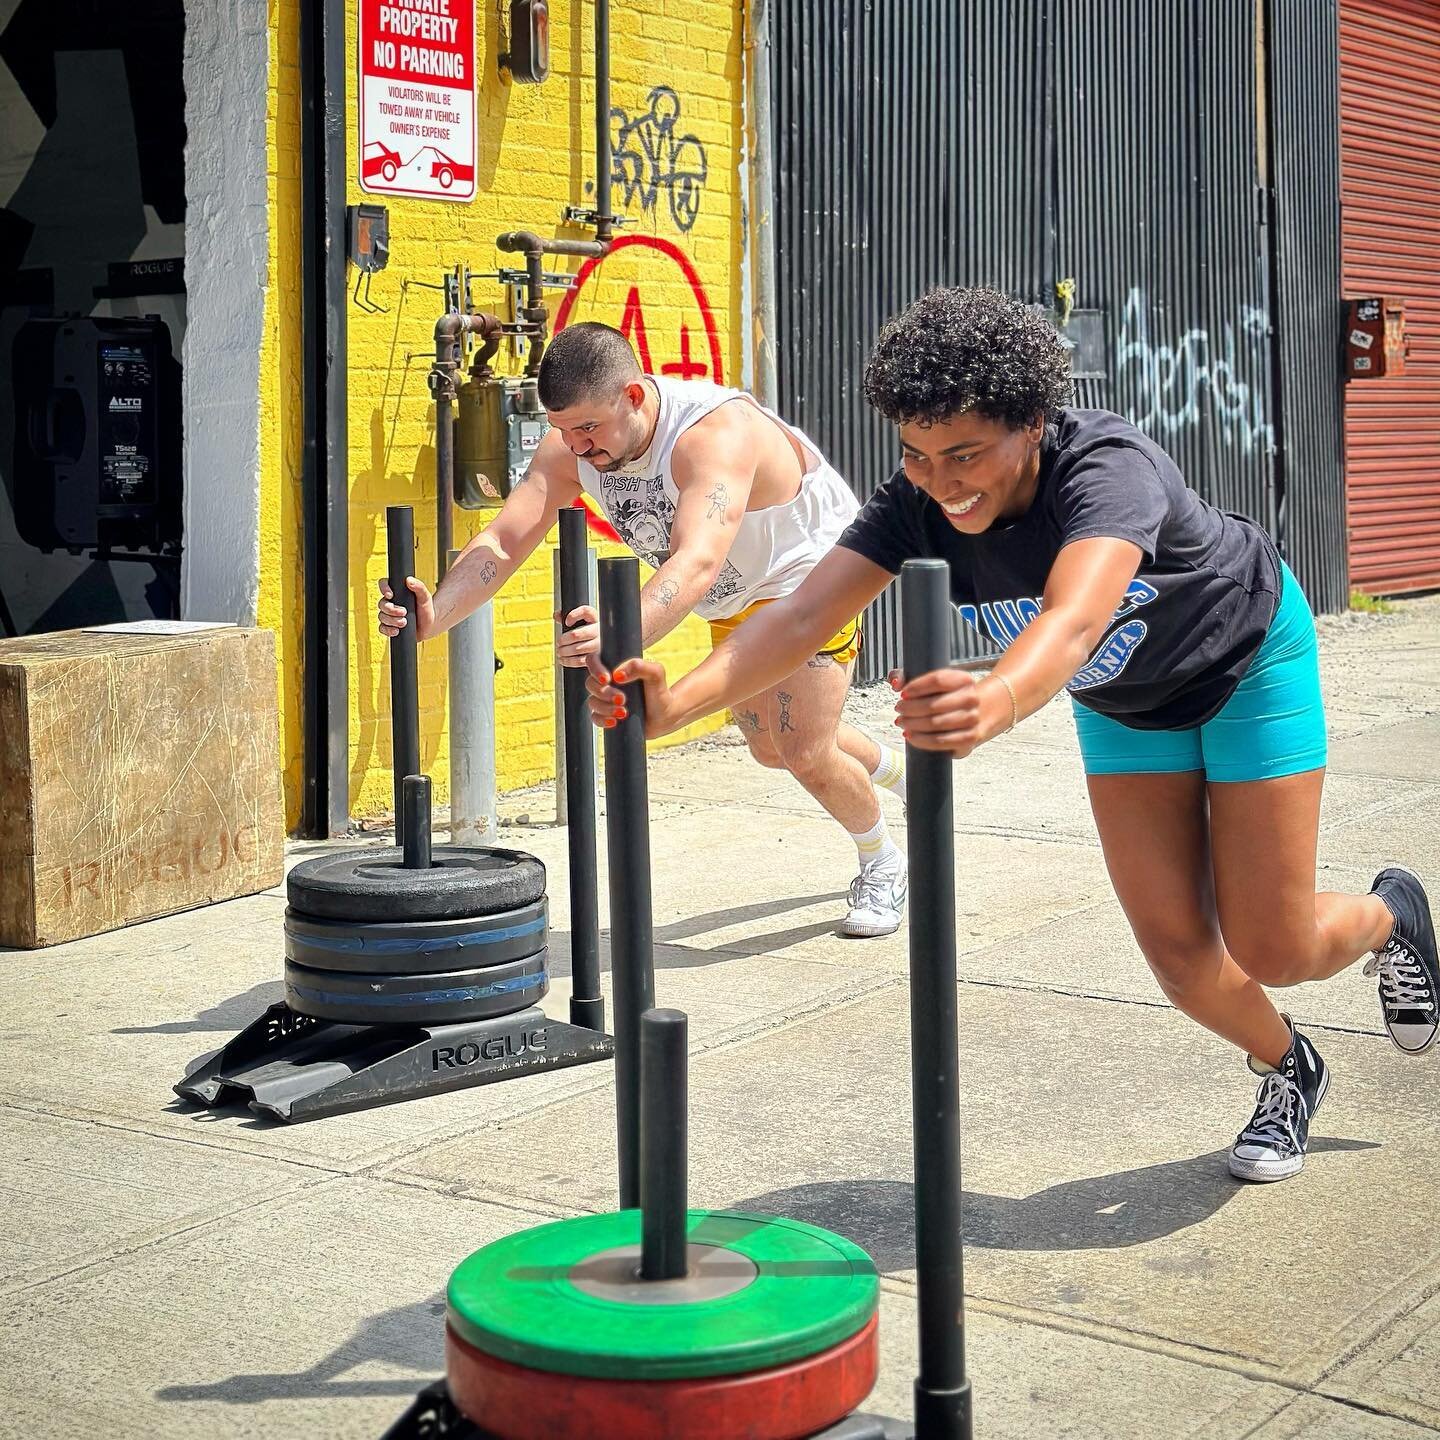 Summer is coming, and gates are up! ☀️

Check the website or email info@deancrossfit.com to find out how to drop in to a class or join the Dean family!

#spring #workout #fitfam #fitness #fitnessmotivation #gym #brooklyn #brooklyngym #workoutmotivati